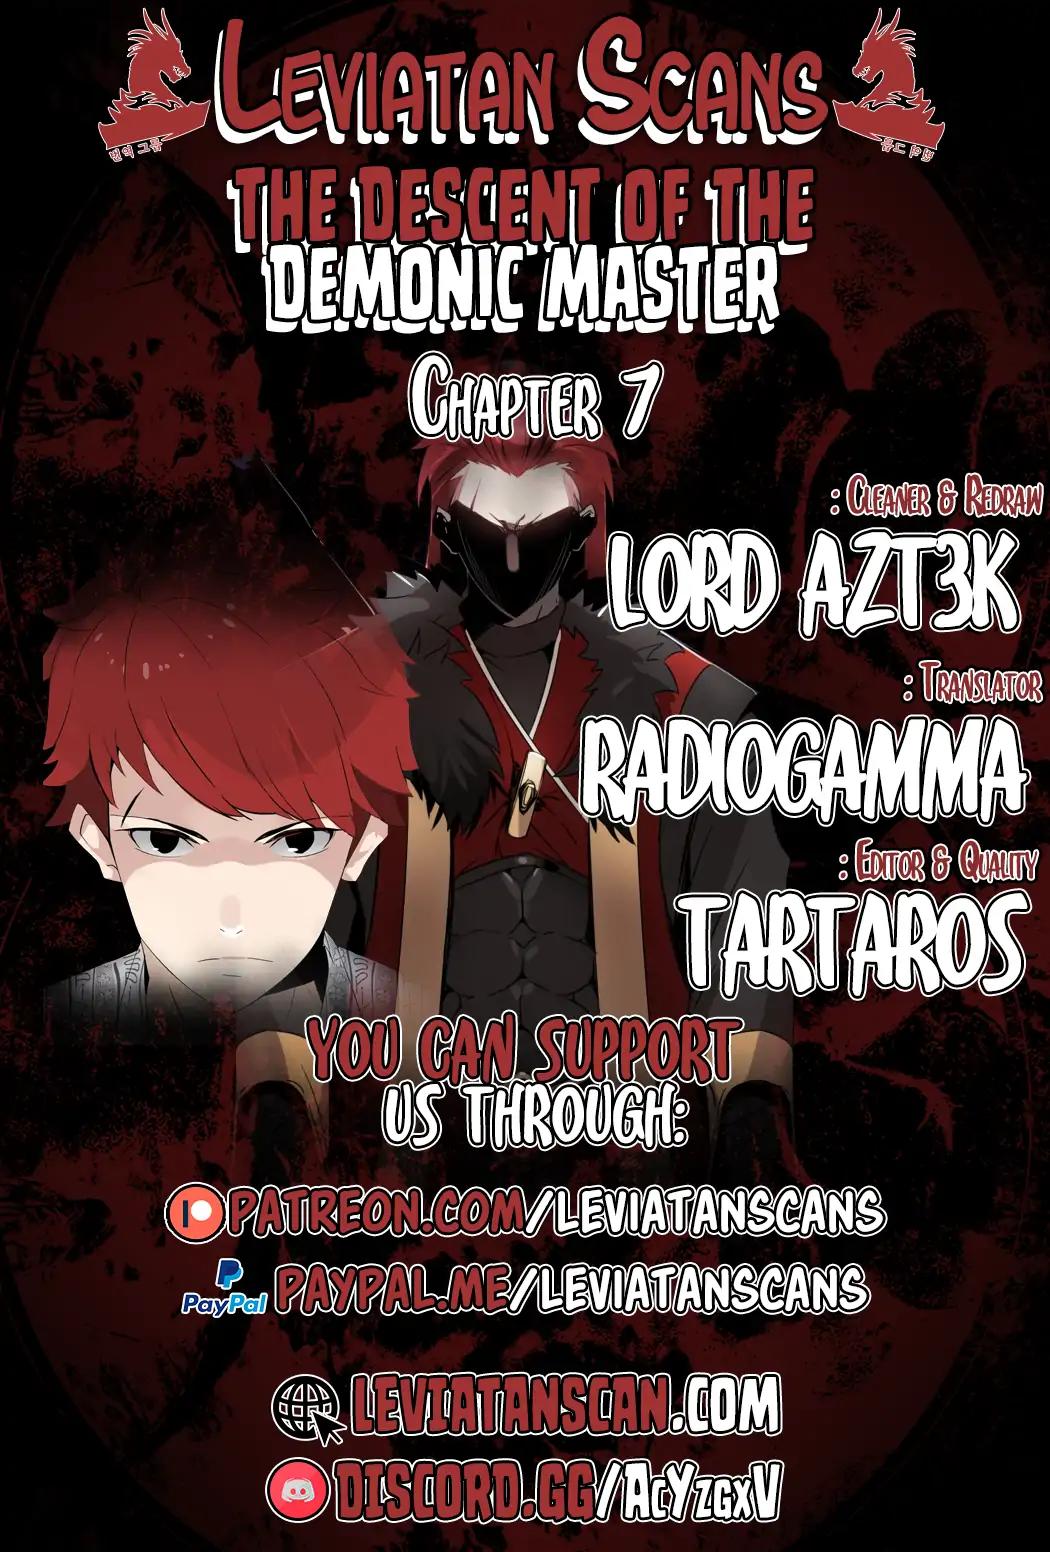 The Descent of the Demonic Master Chapter 7